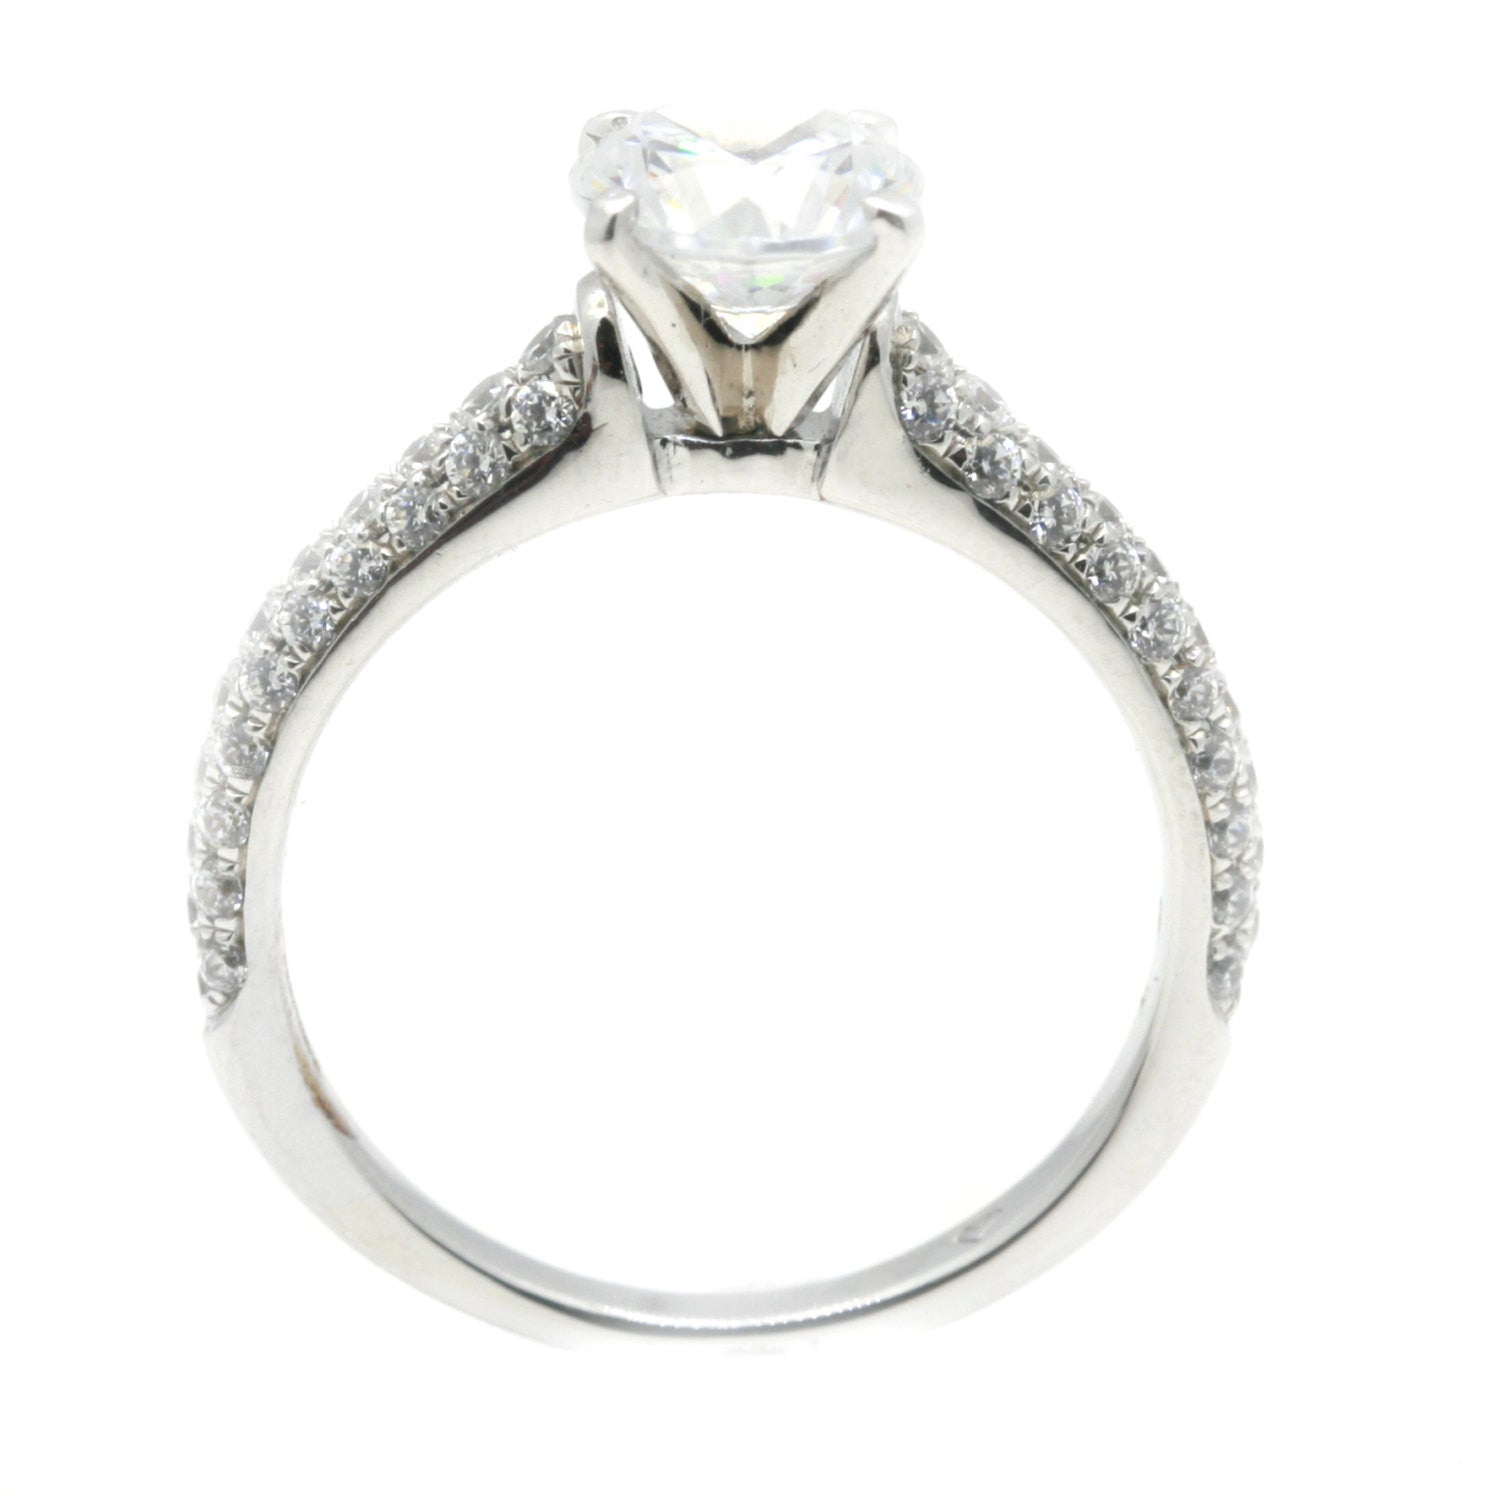 Diamond Engagement Solitaire Ring Setting for 1 Carat Center Stone, Semi Mount - 73765